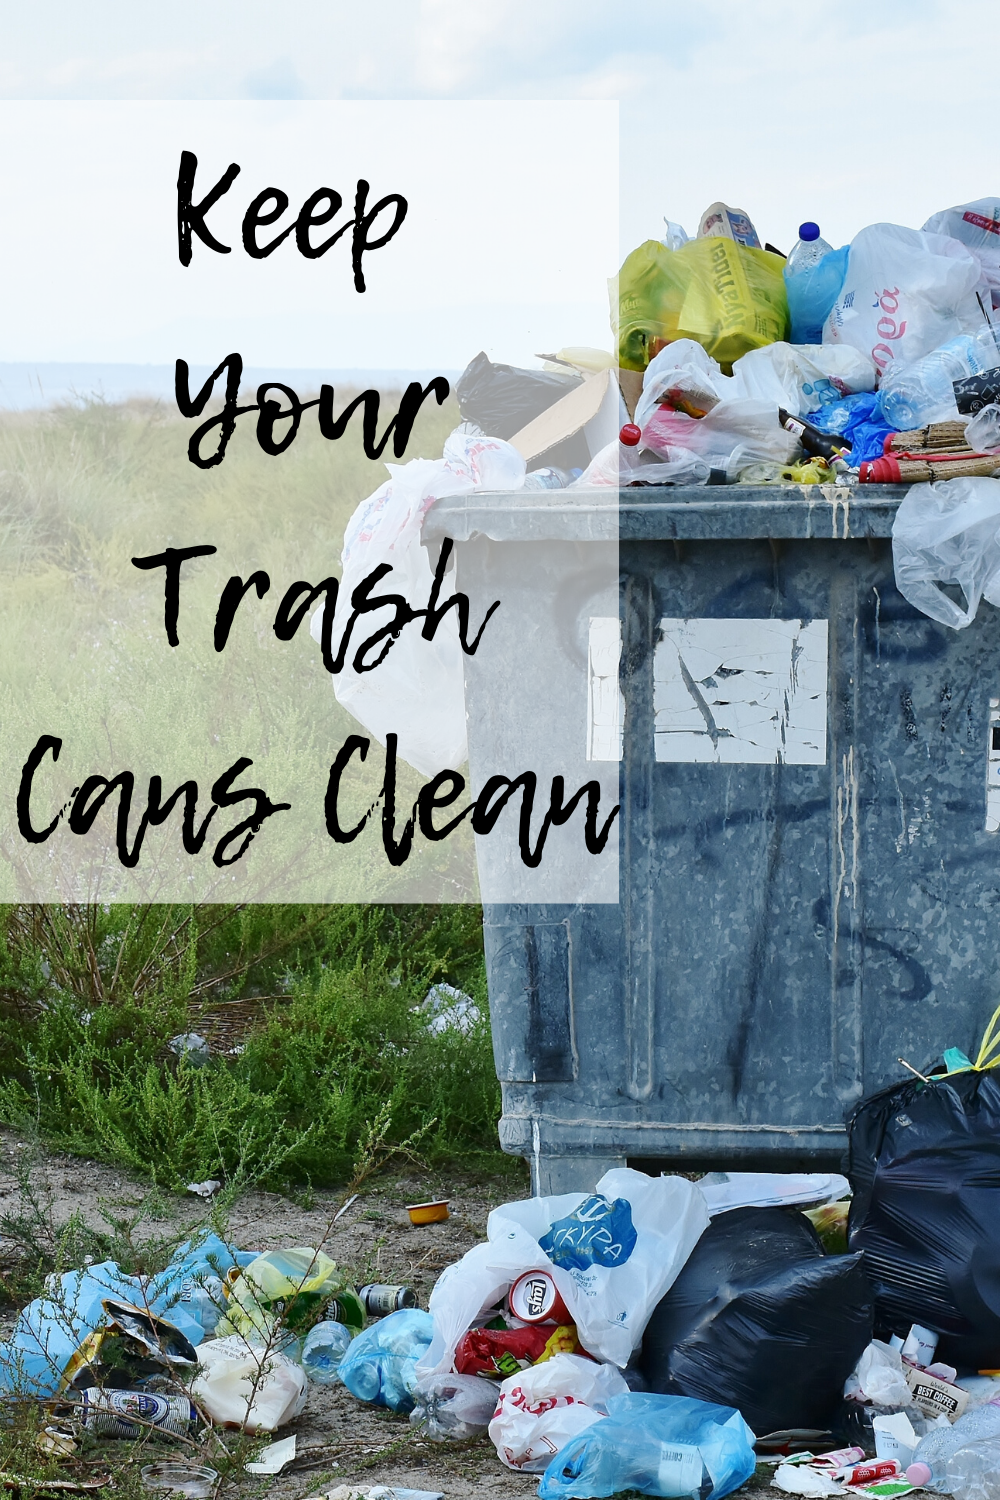 https://momandmore.com/wp-content/uploads/2020/02/Keep-Your-Trash-Cans-Clean-Even-If-they-are-Meant-for-Trash.png